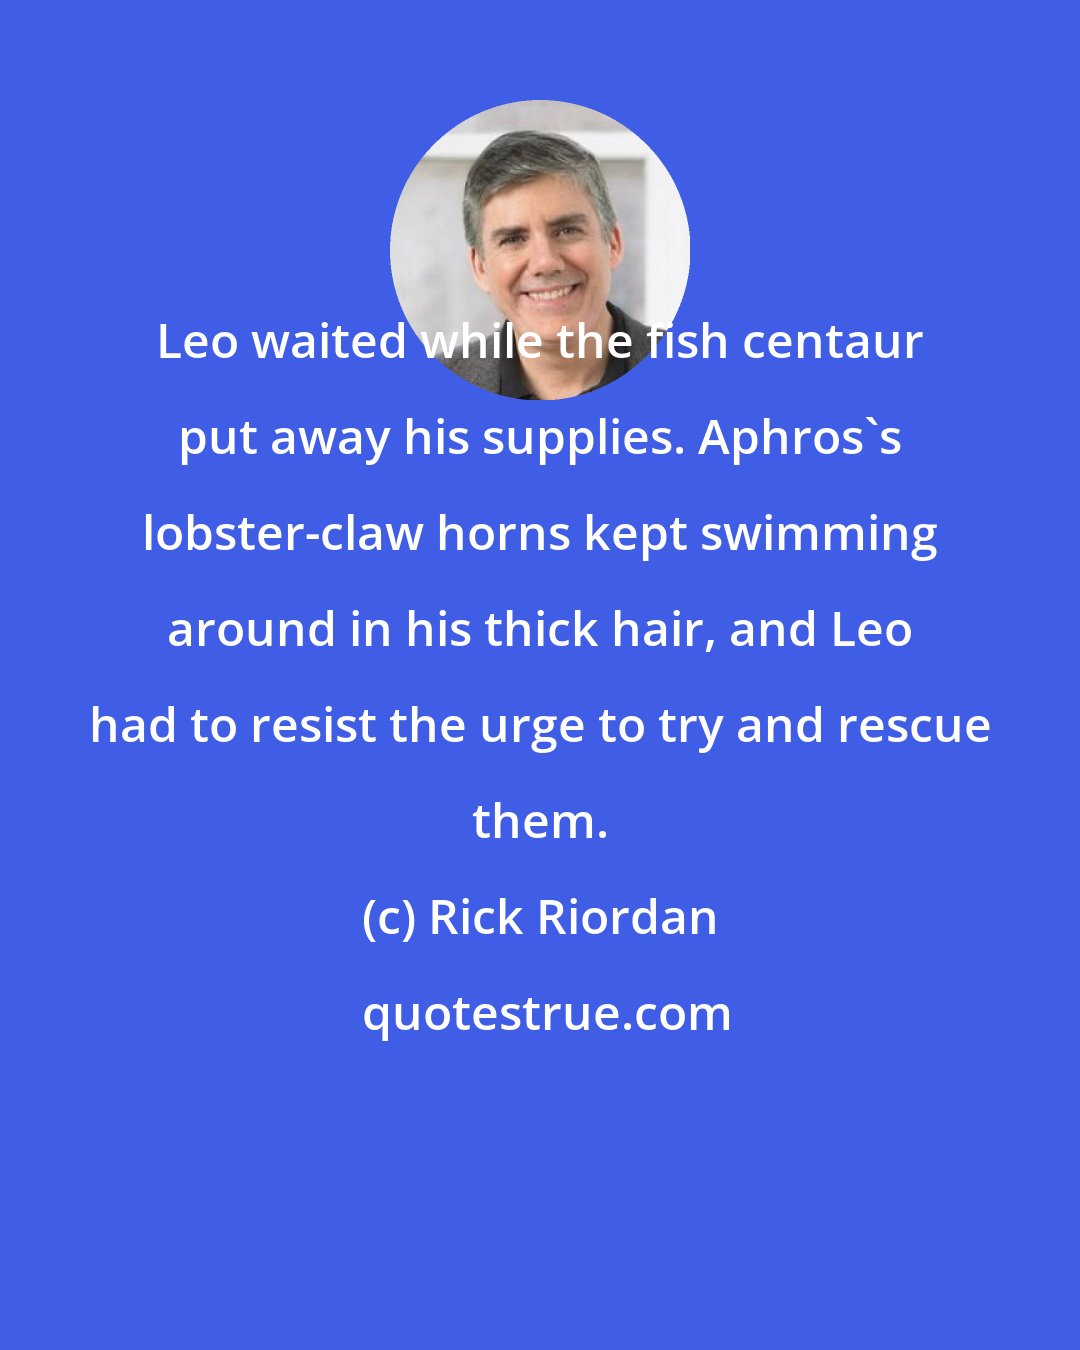 Rick Riordan: Leo waited while the fish centaur put away his supplies. Aphros's lobster-claw horns kept swimming around in his thick hair, and Leo had to resist the urge to try and rescue them.